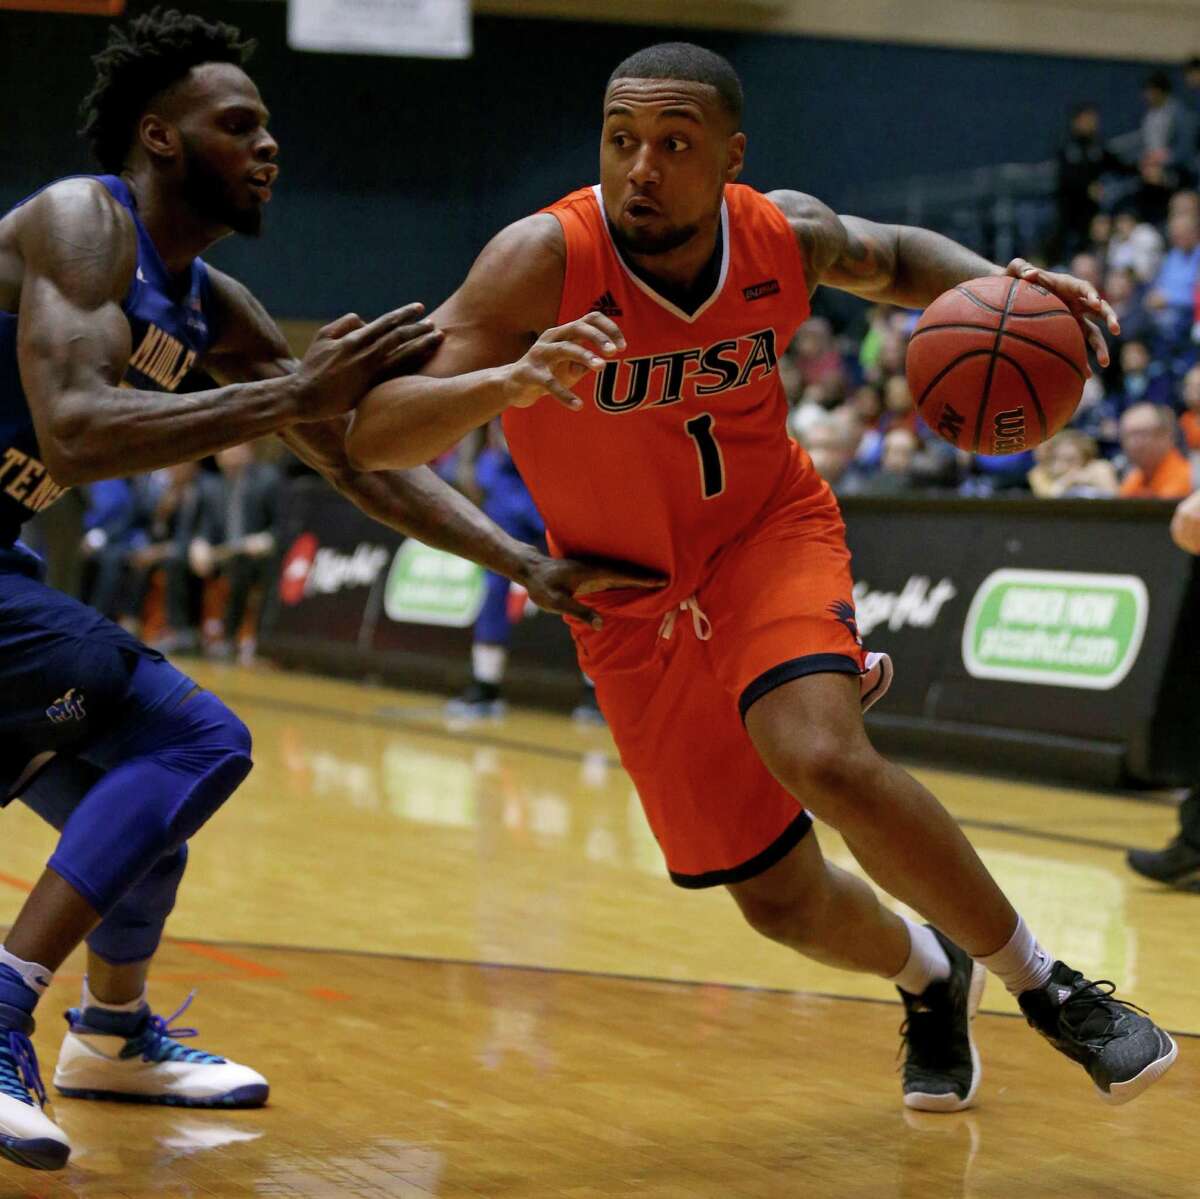 UTSA?•s Jeff Beverly drives around Middle Tennessee's JaCorey Williams during second half action Thursday Feb. 2, 2017 at the Convocation Center. Middle Tennessee won 69-59.